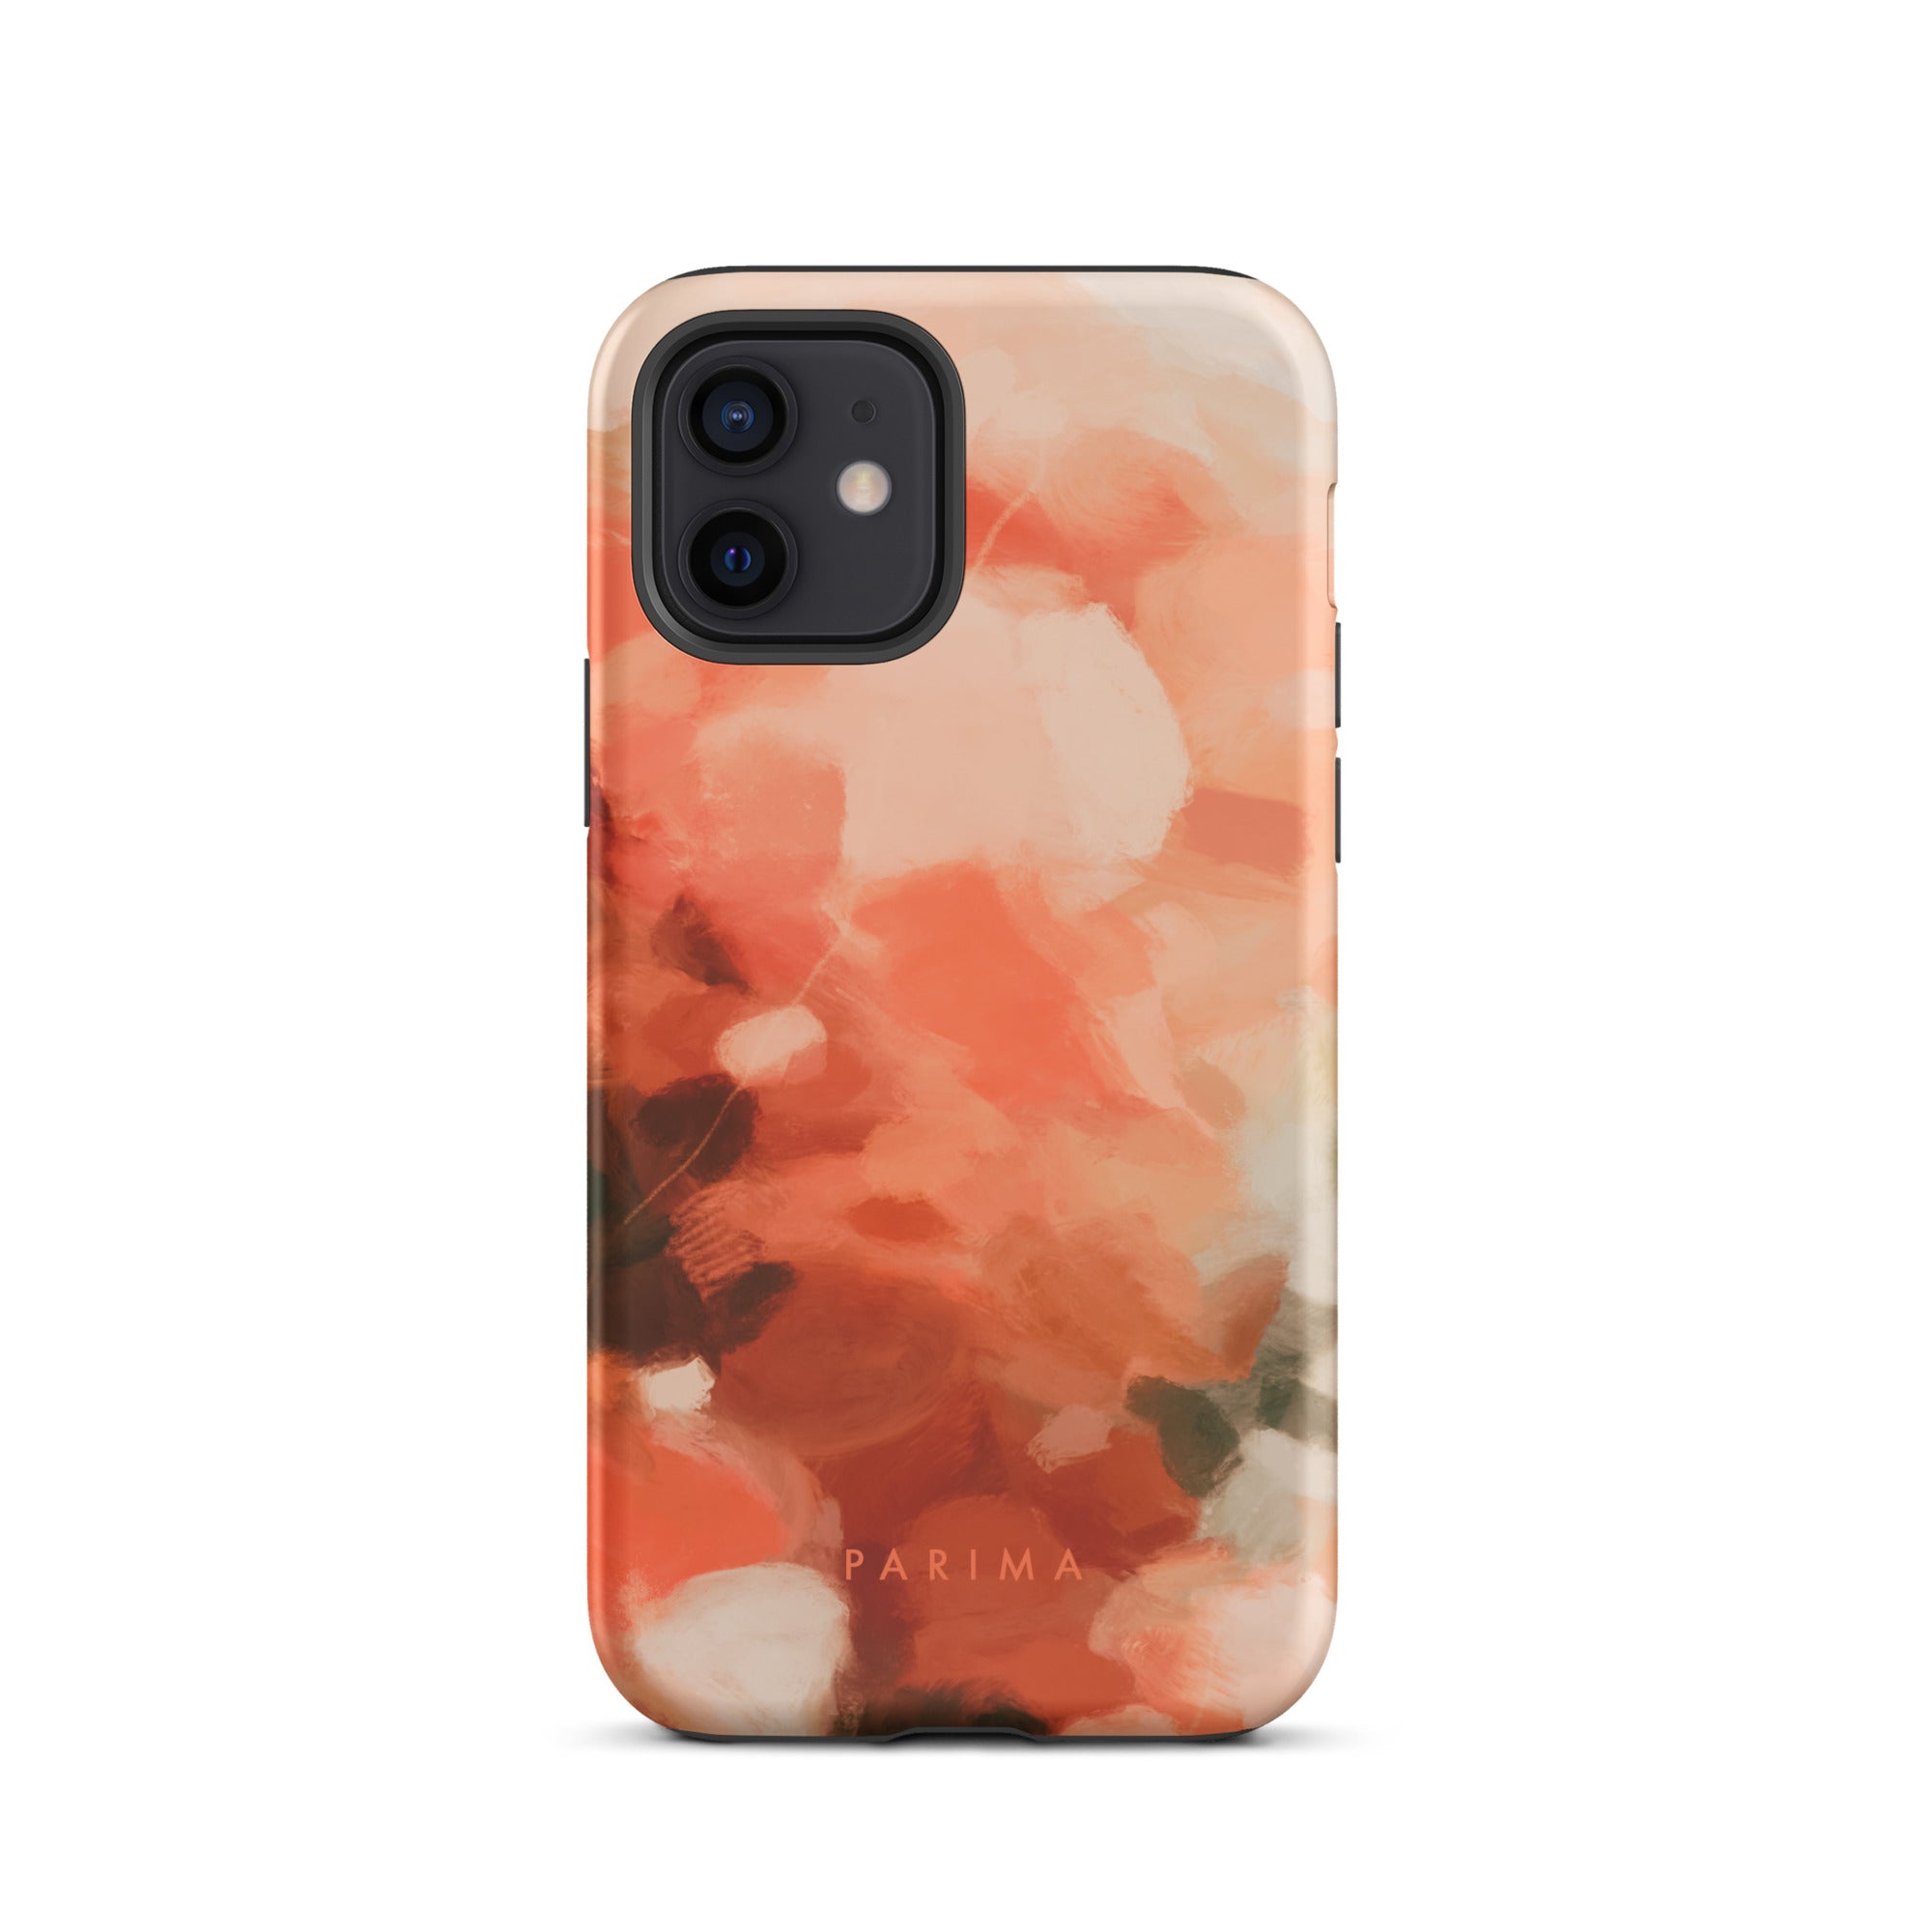 Sweet Nectar, orange and pink abstract art - iPhone 12 tough case by Parima Studio